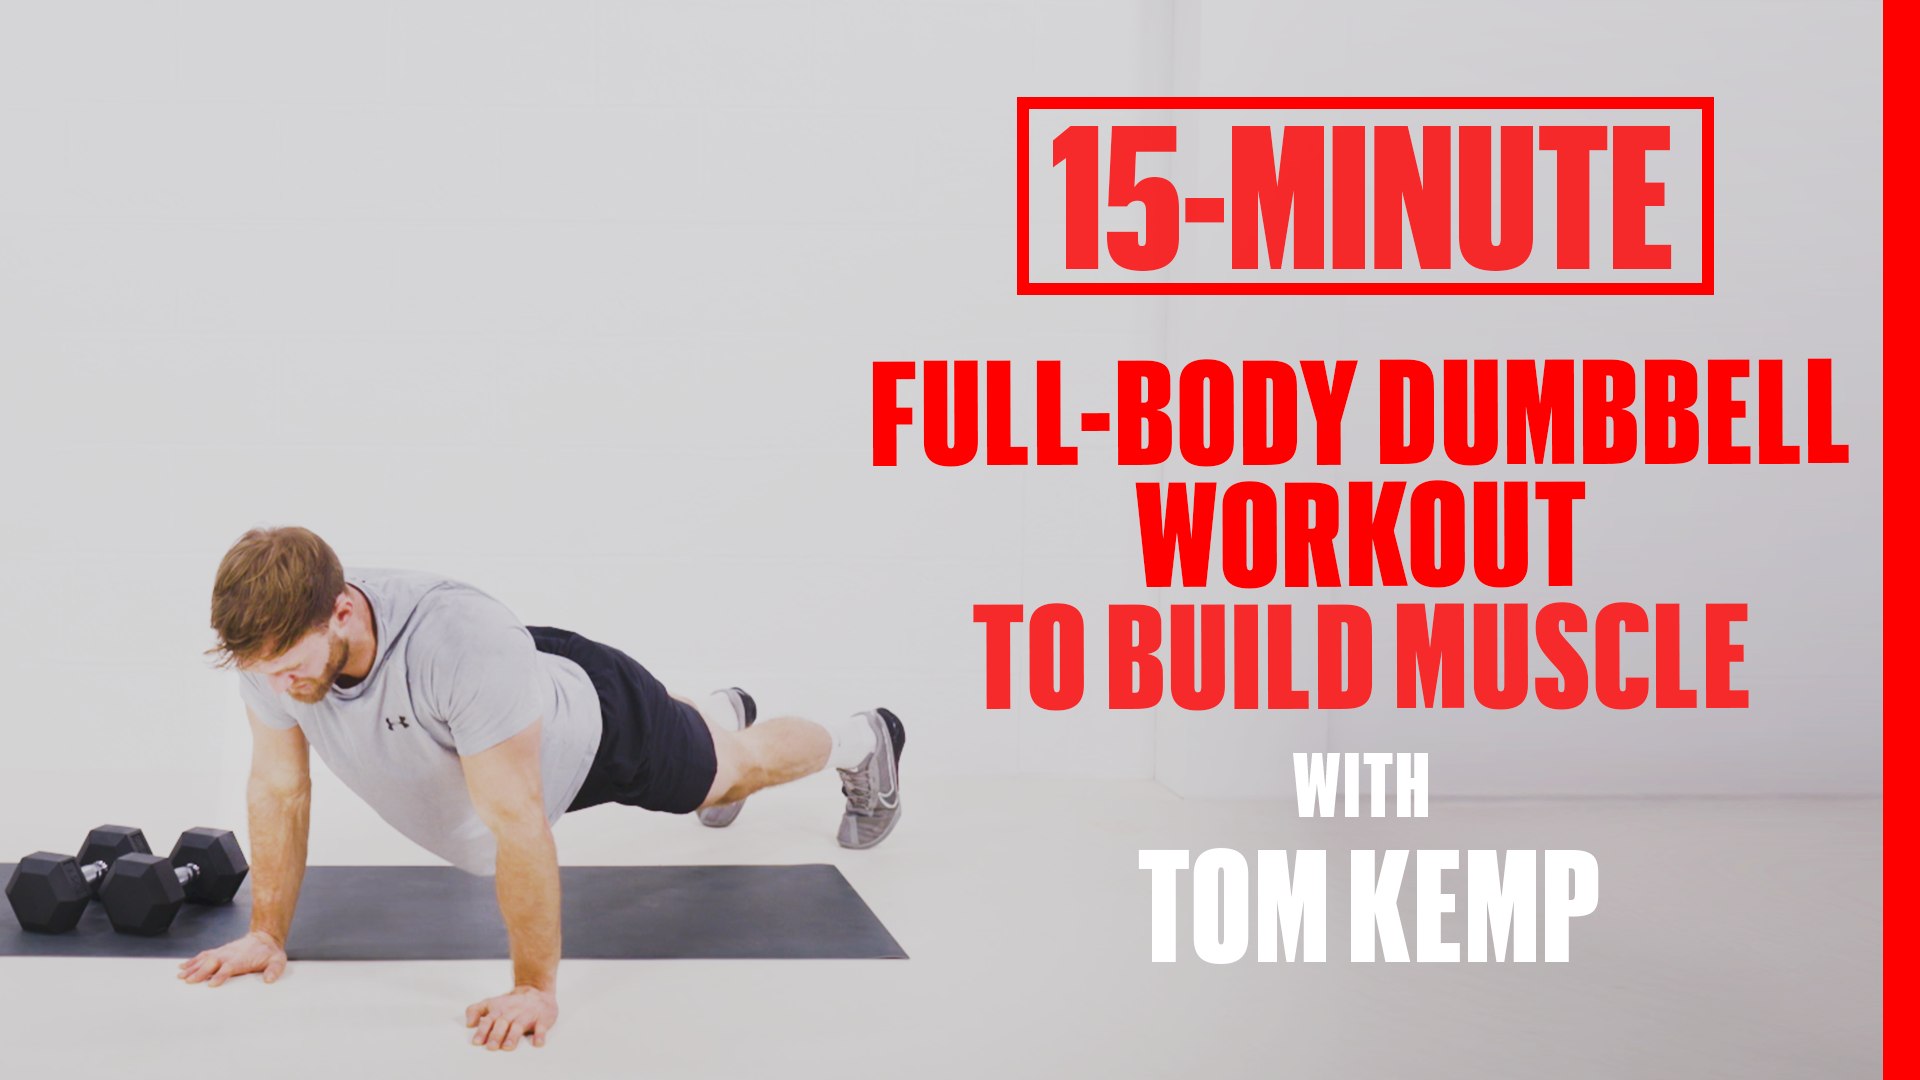 Total Body Dumbbell Workout  Dumbbell workout, Total body workout